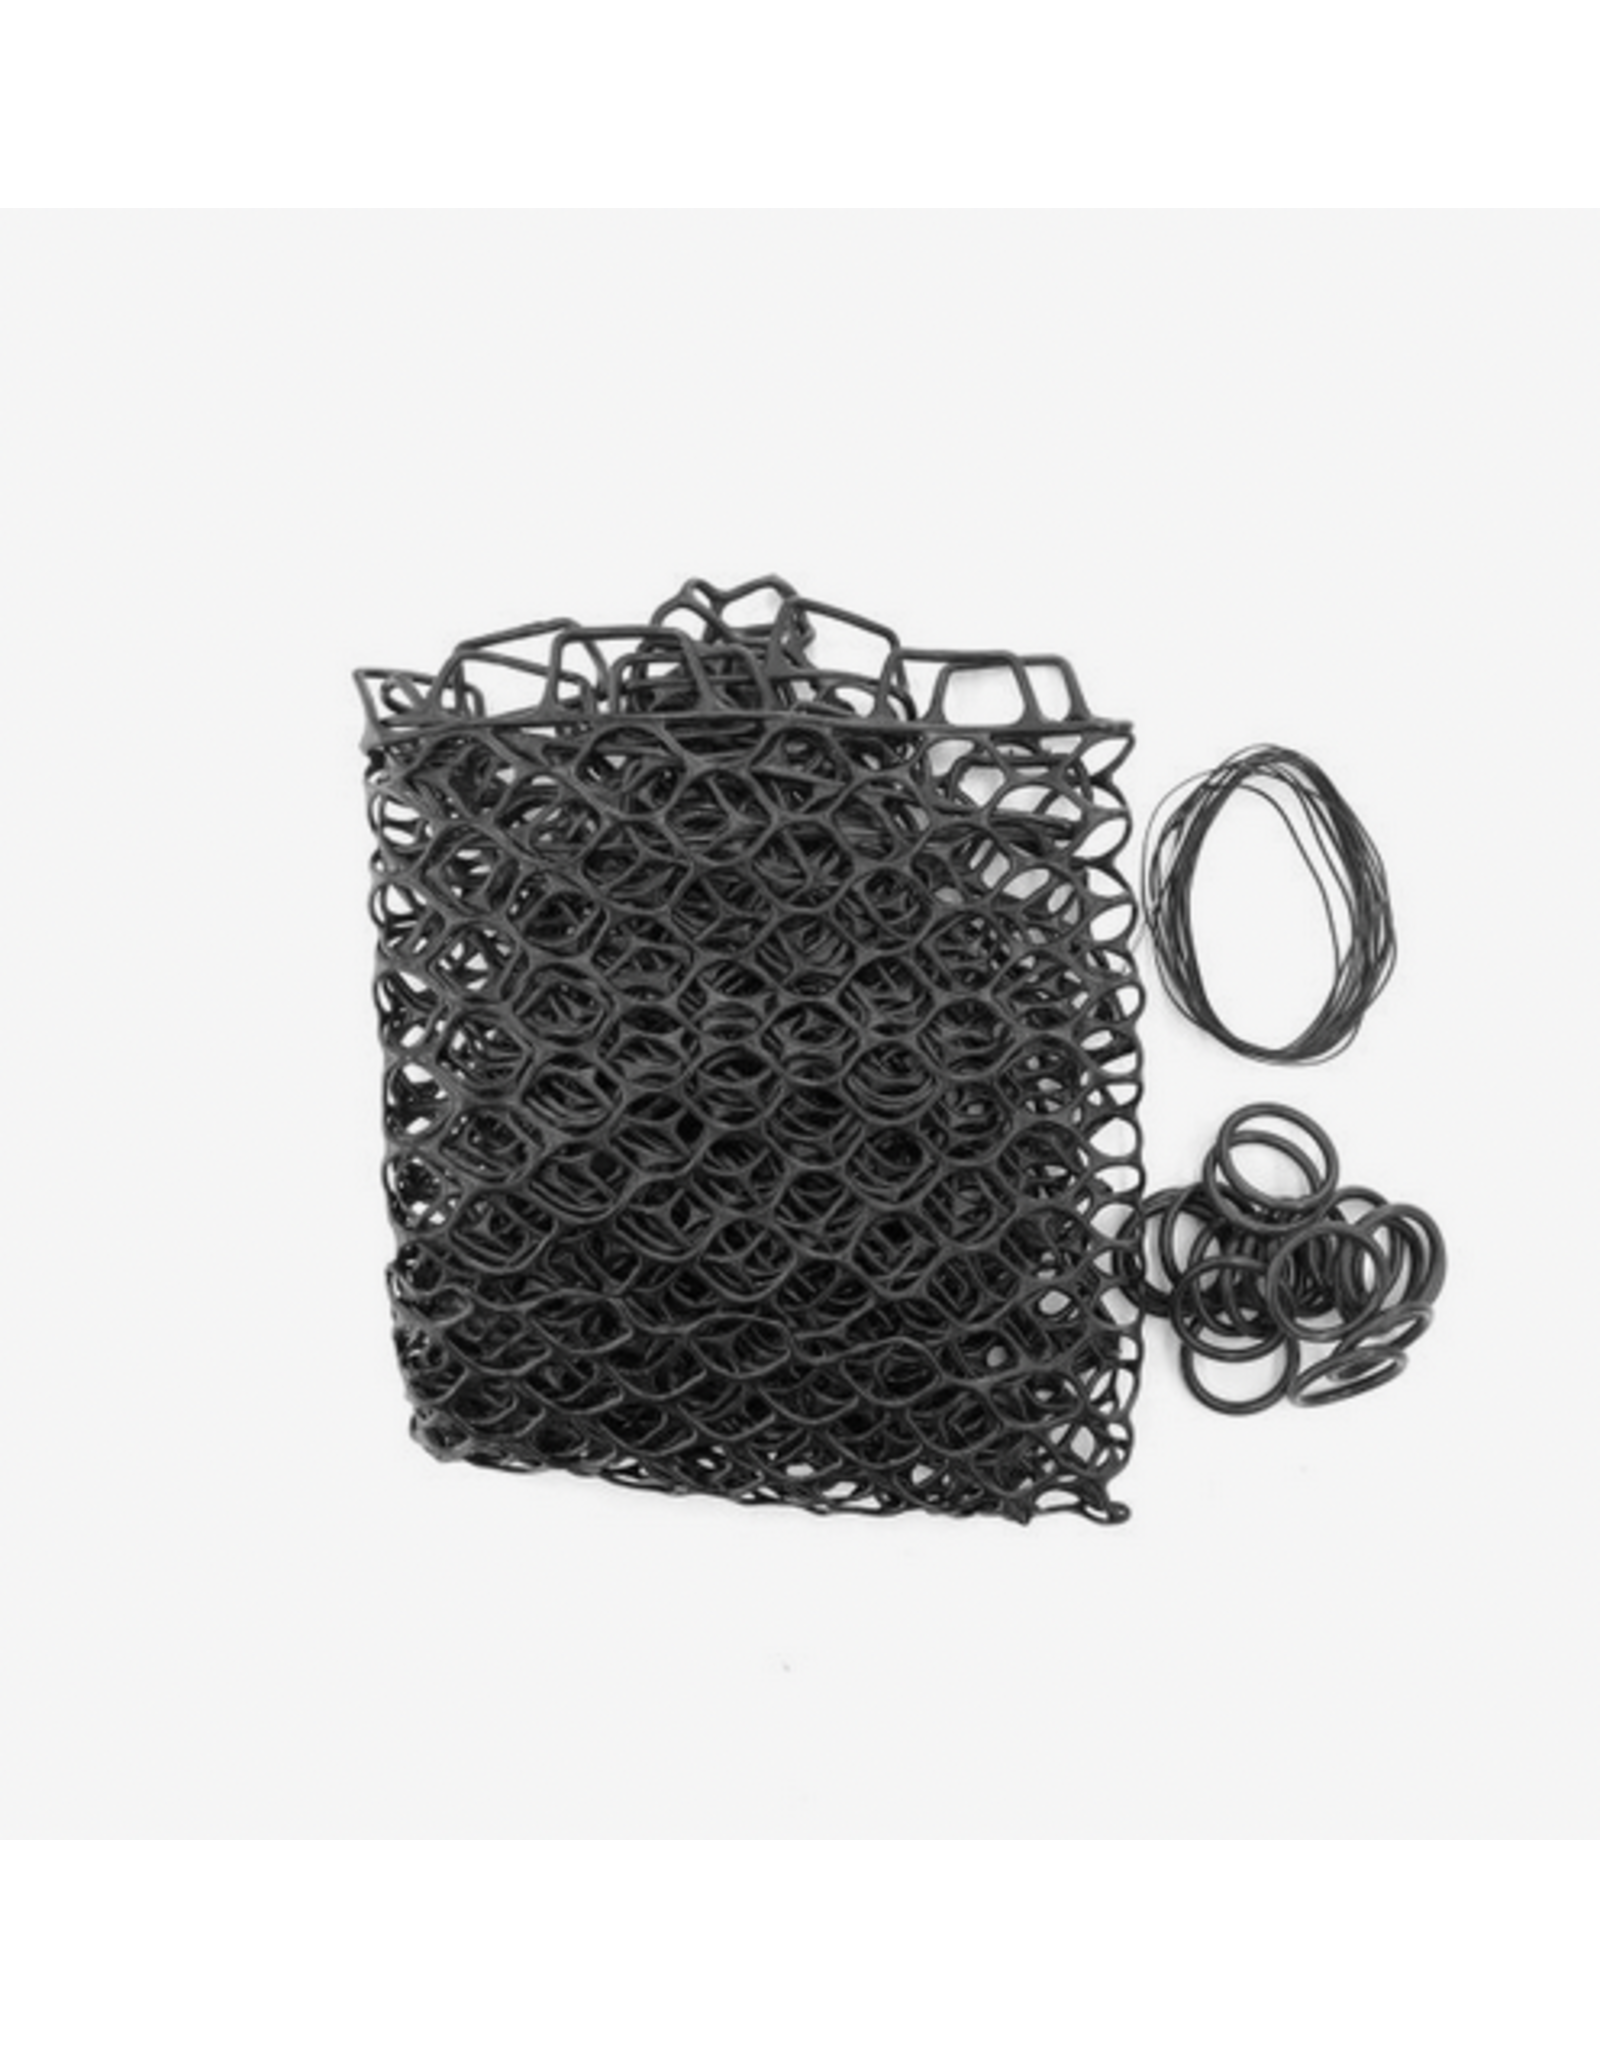 Fishpond Nomad Replacement Rubber Net Bag